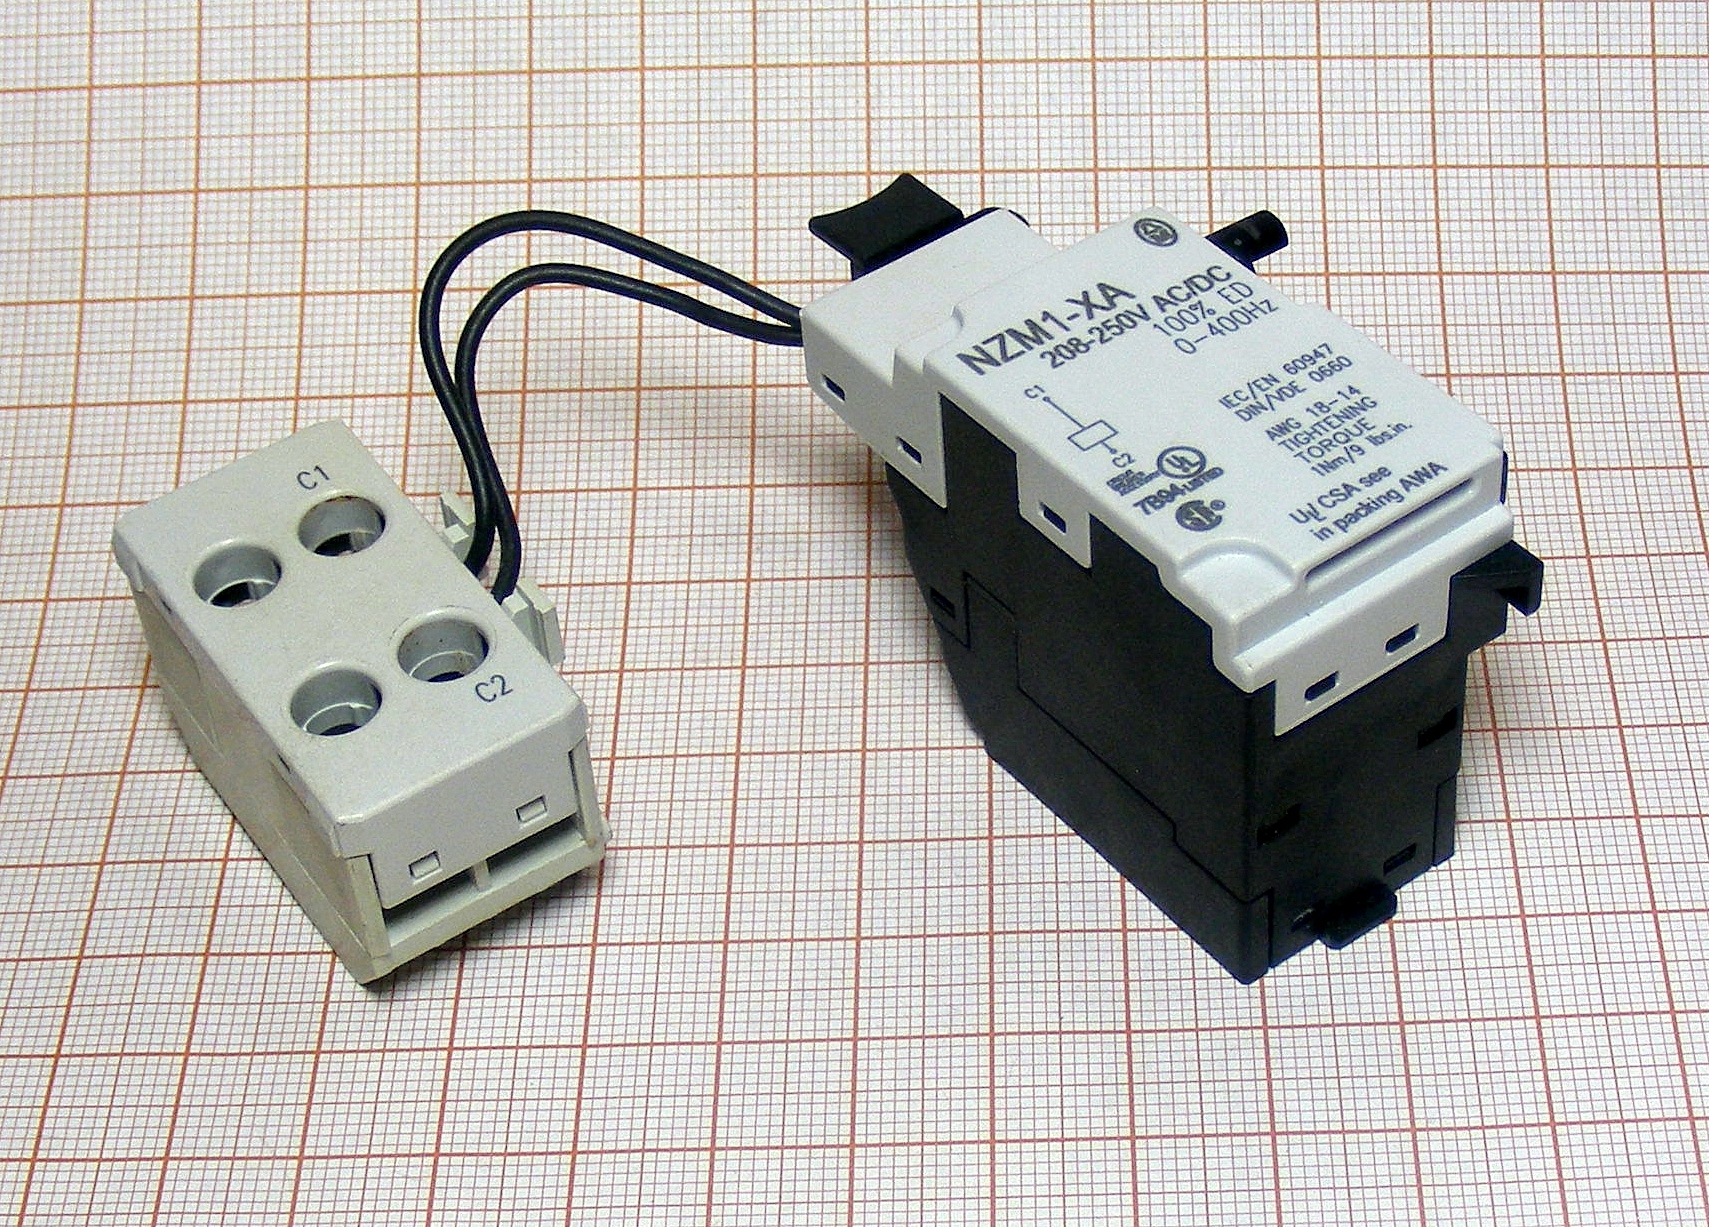 CONTACTOR DIL1M-G 3PH 600VAC MAX 55A MOELLER ID27799